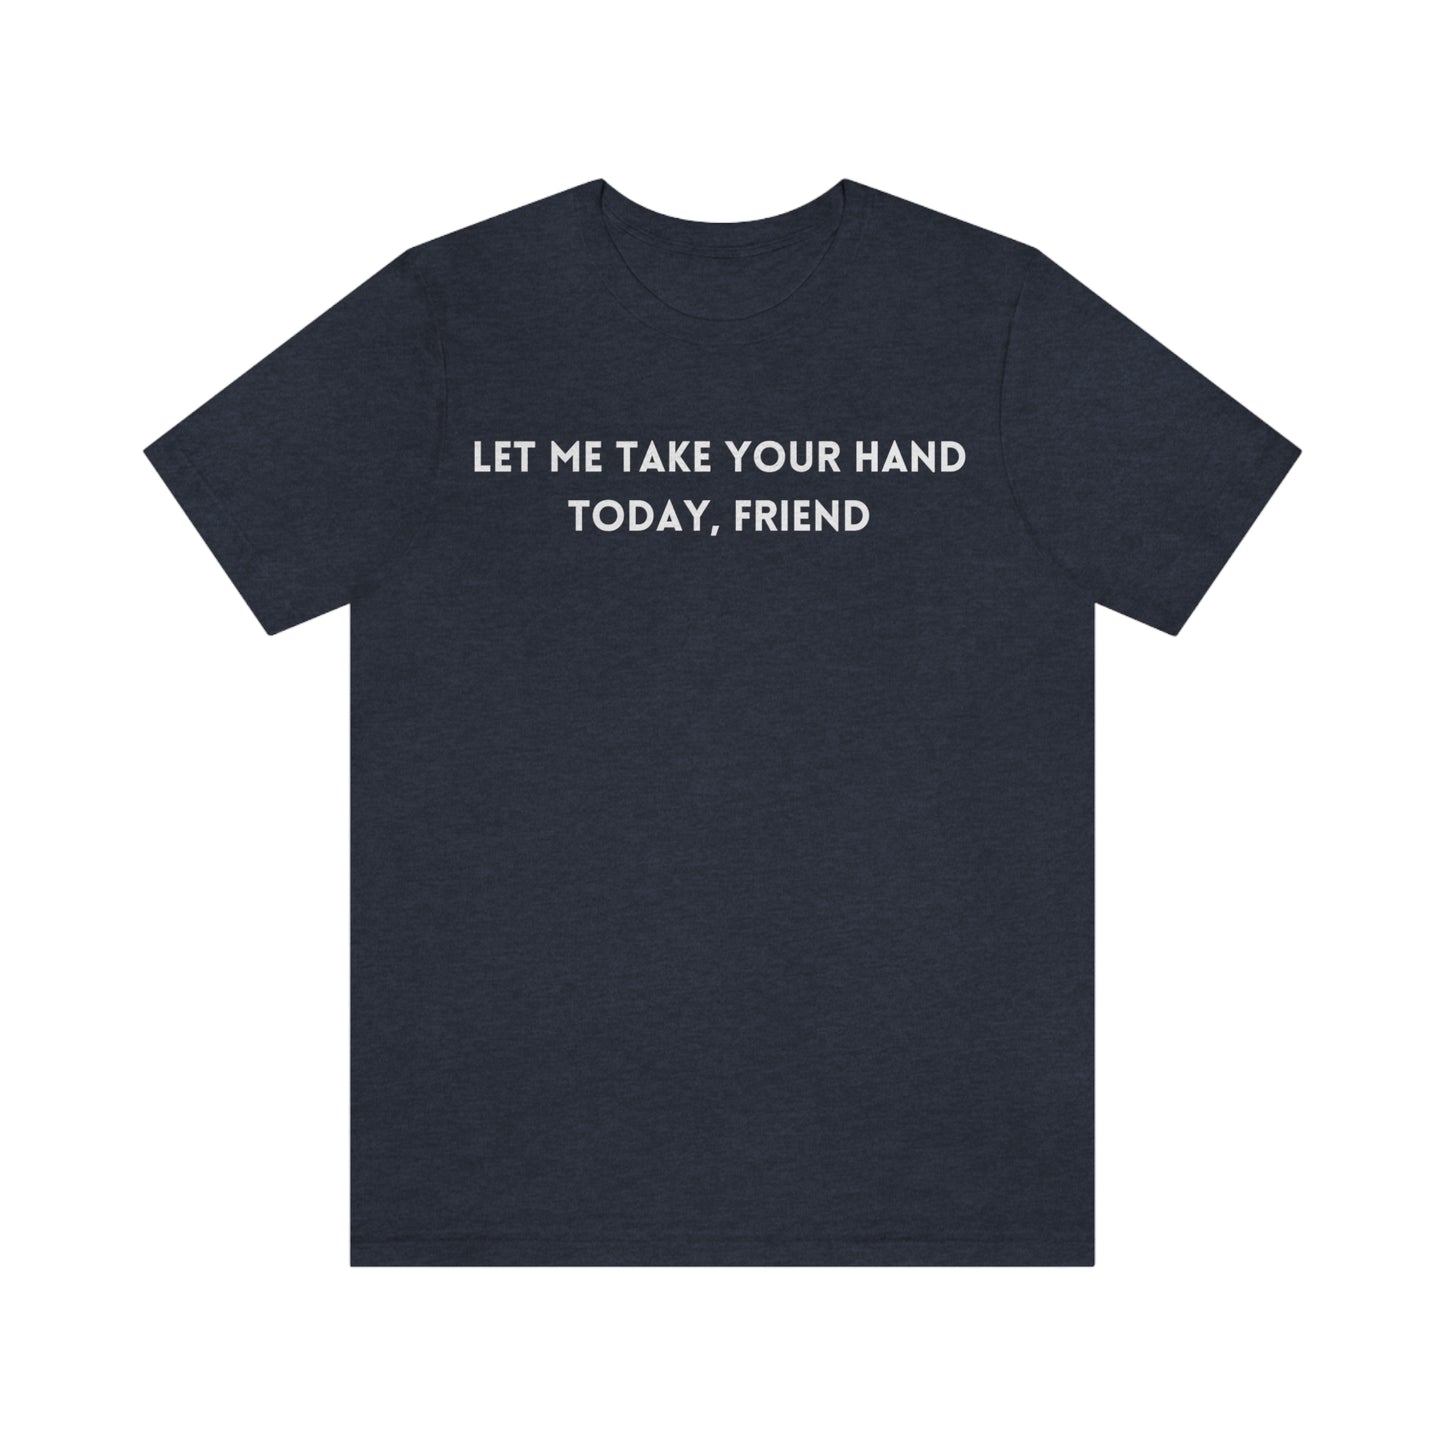 Let me take your hand today friend tee shirt, inspirational words tshirt, tshirt gift for caring friends, self affirming words t shirts